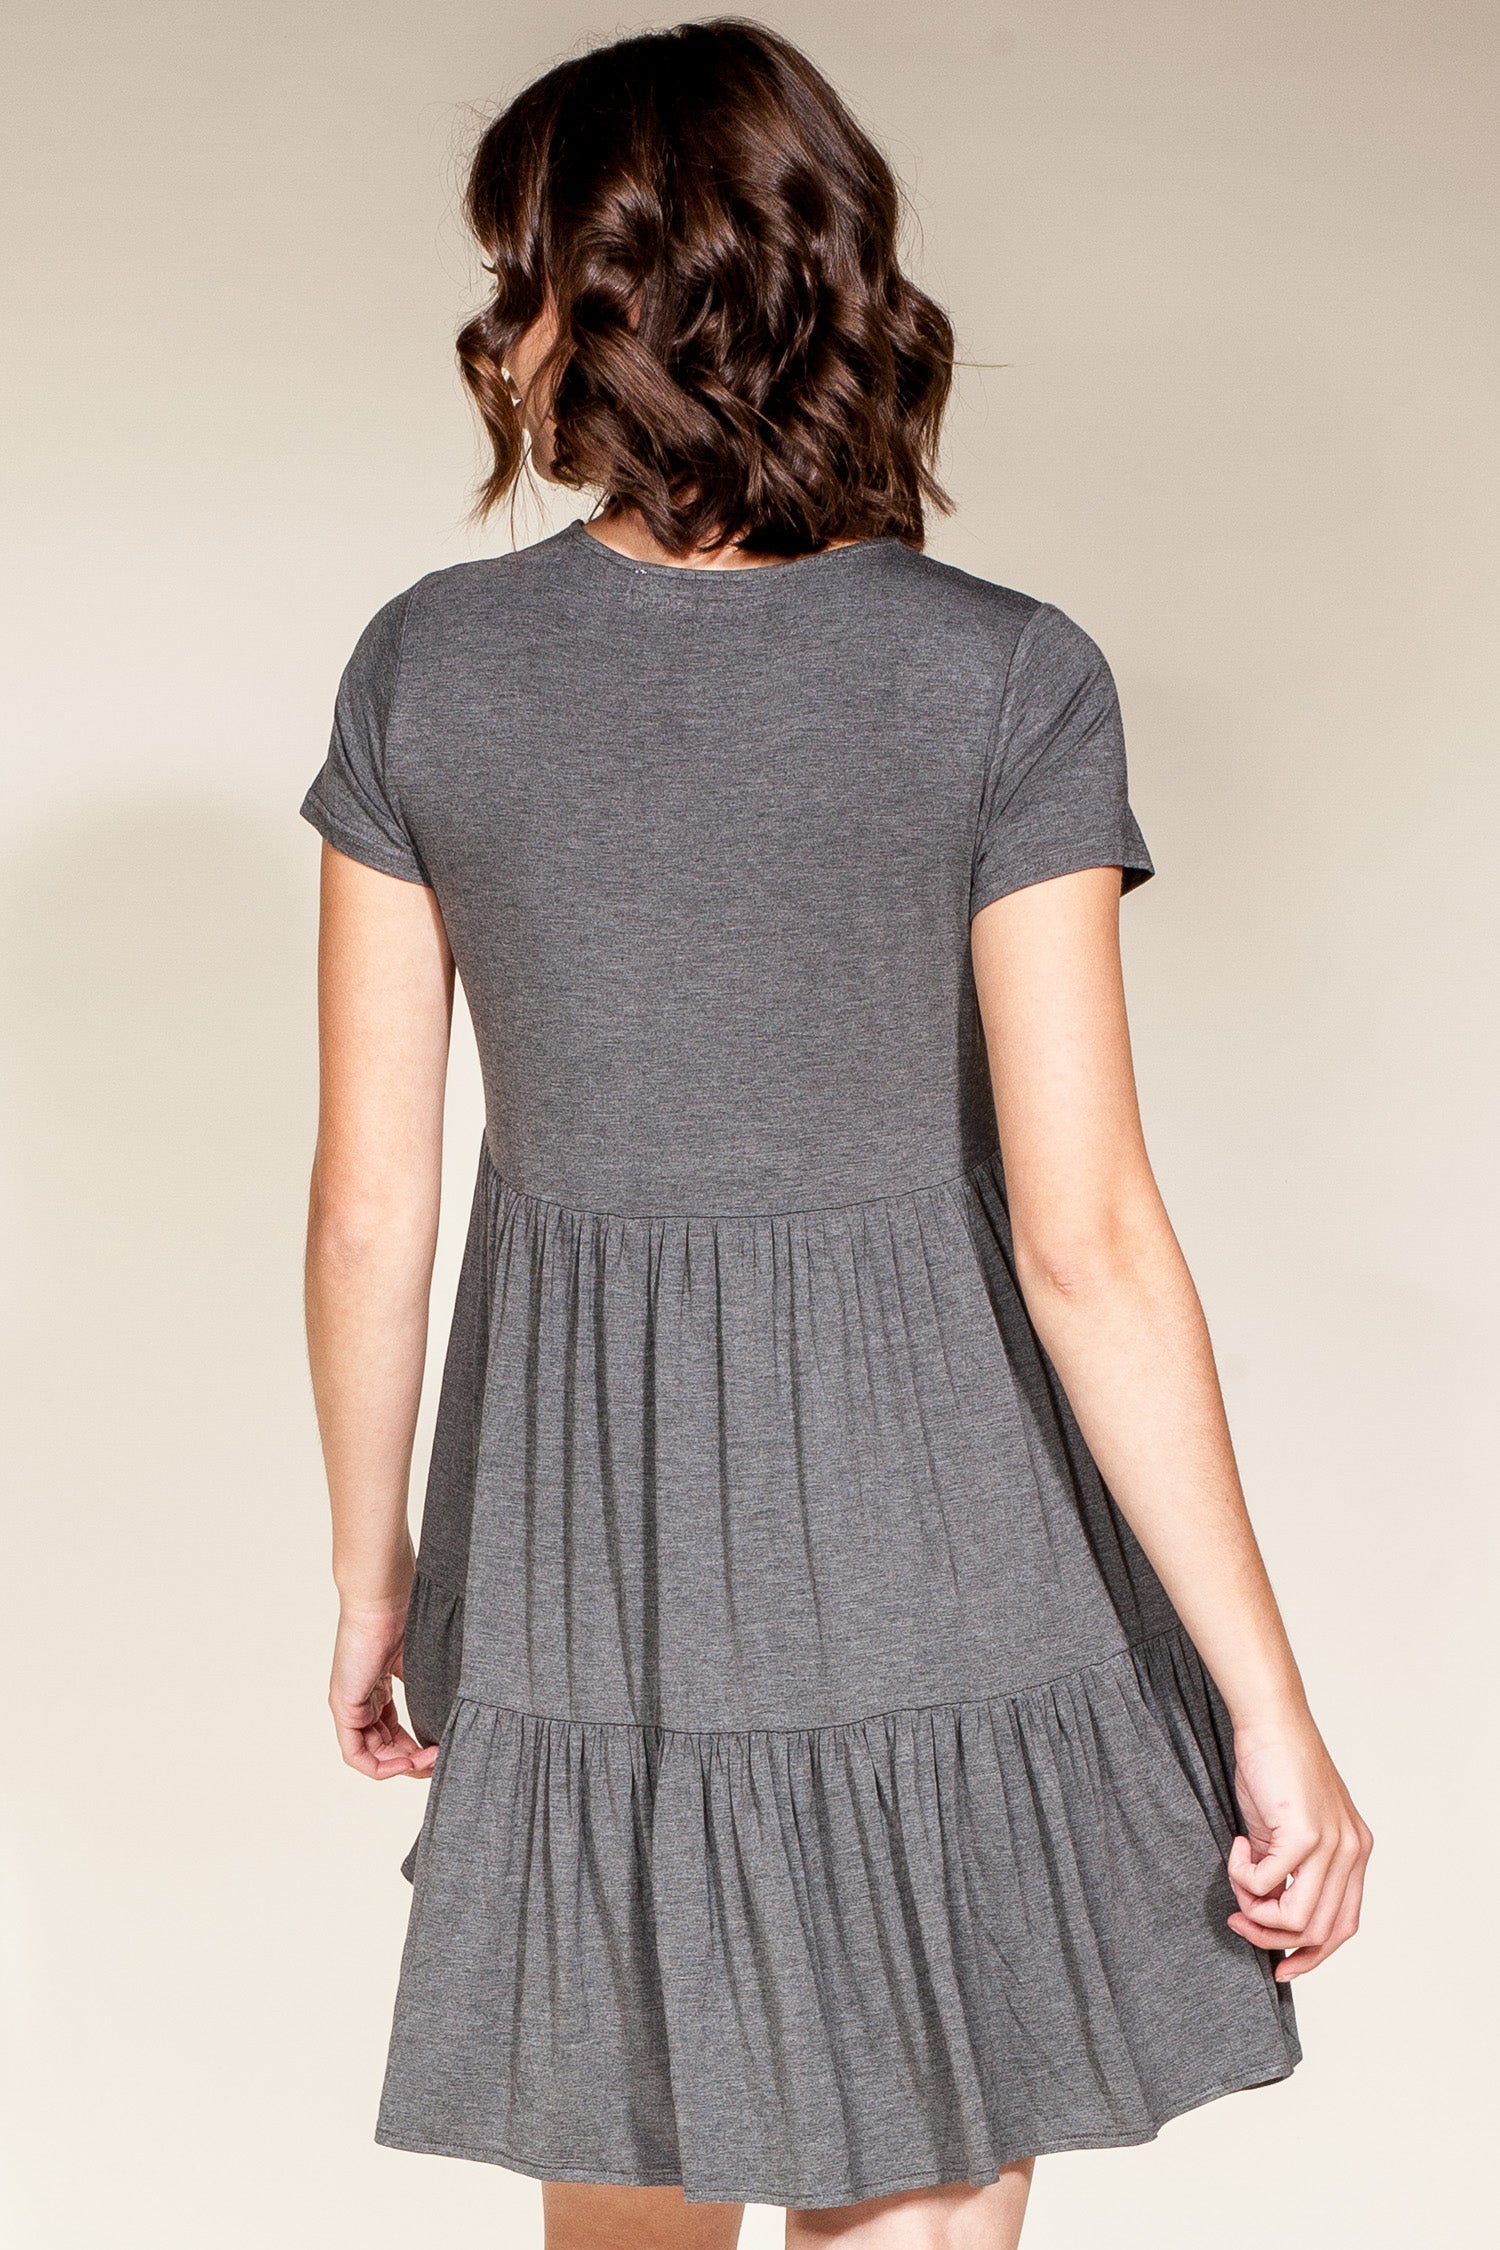 Lola Dress Charcoal - Pink Martini Collection